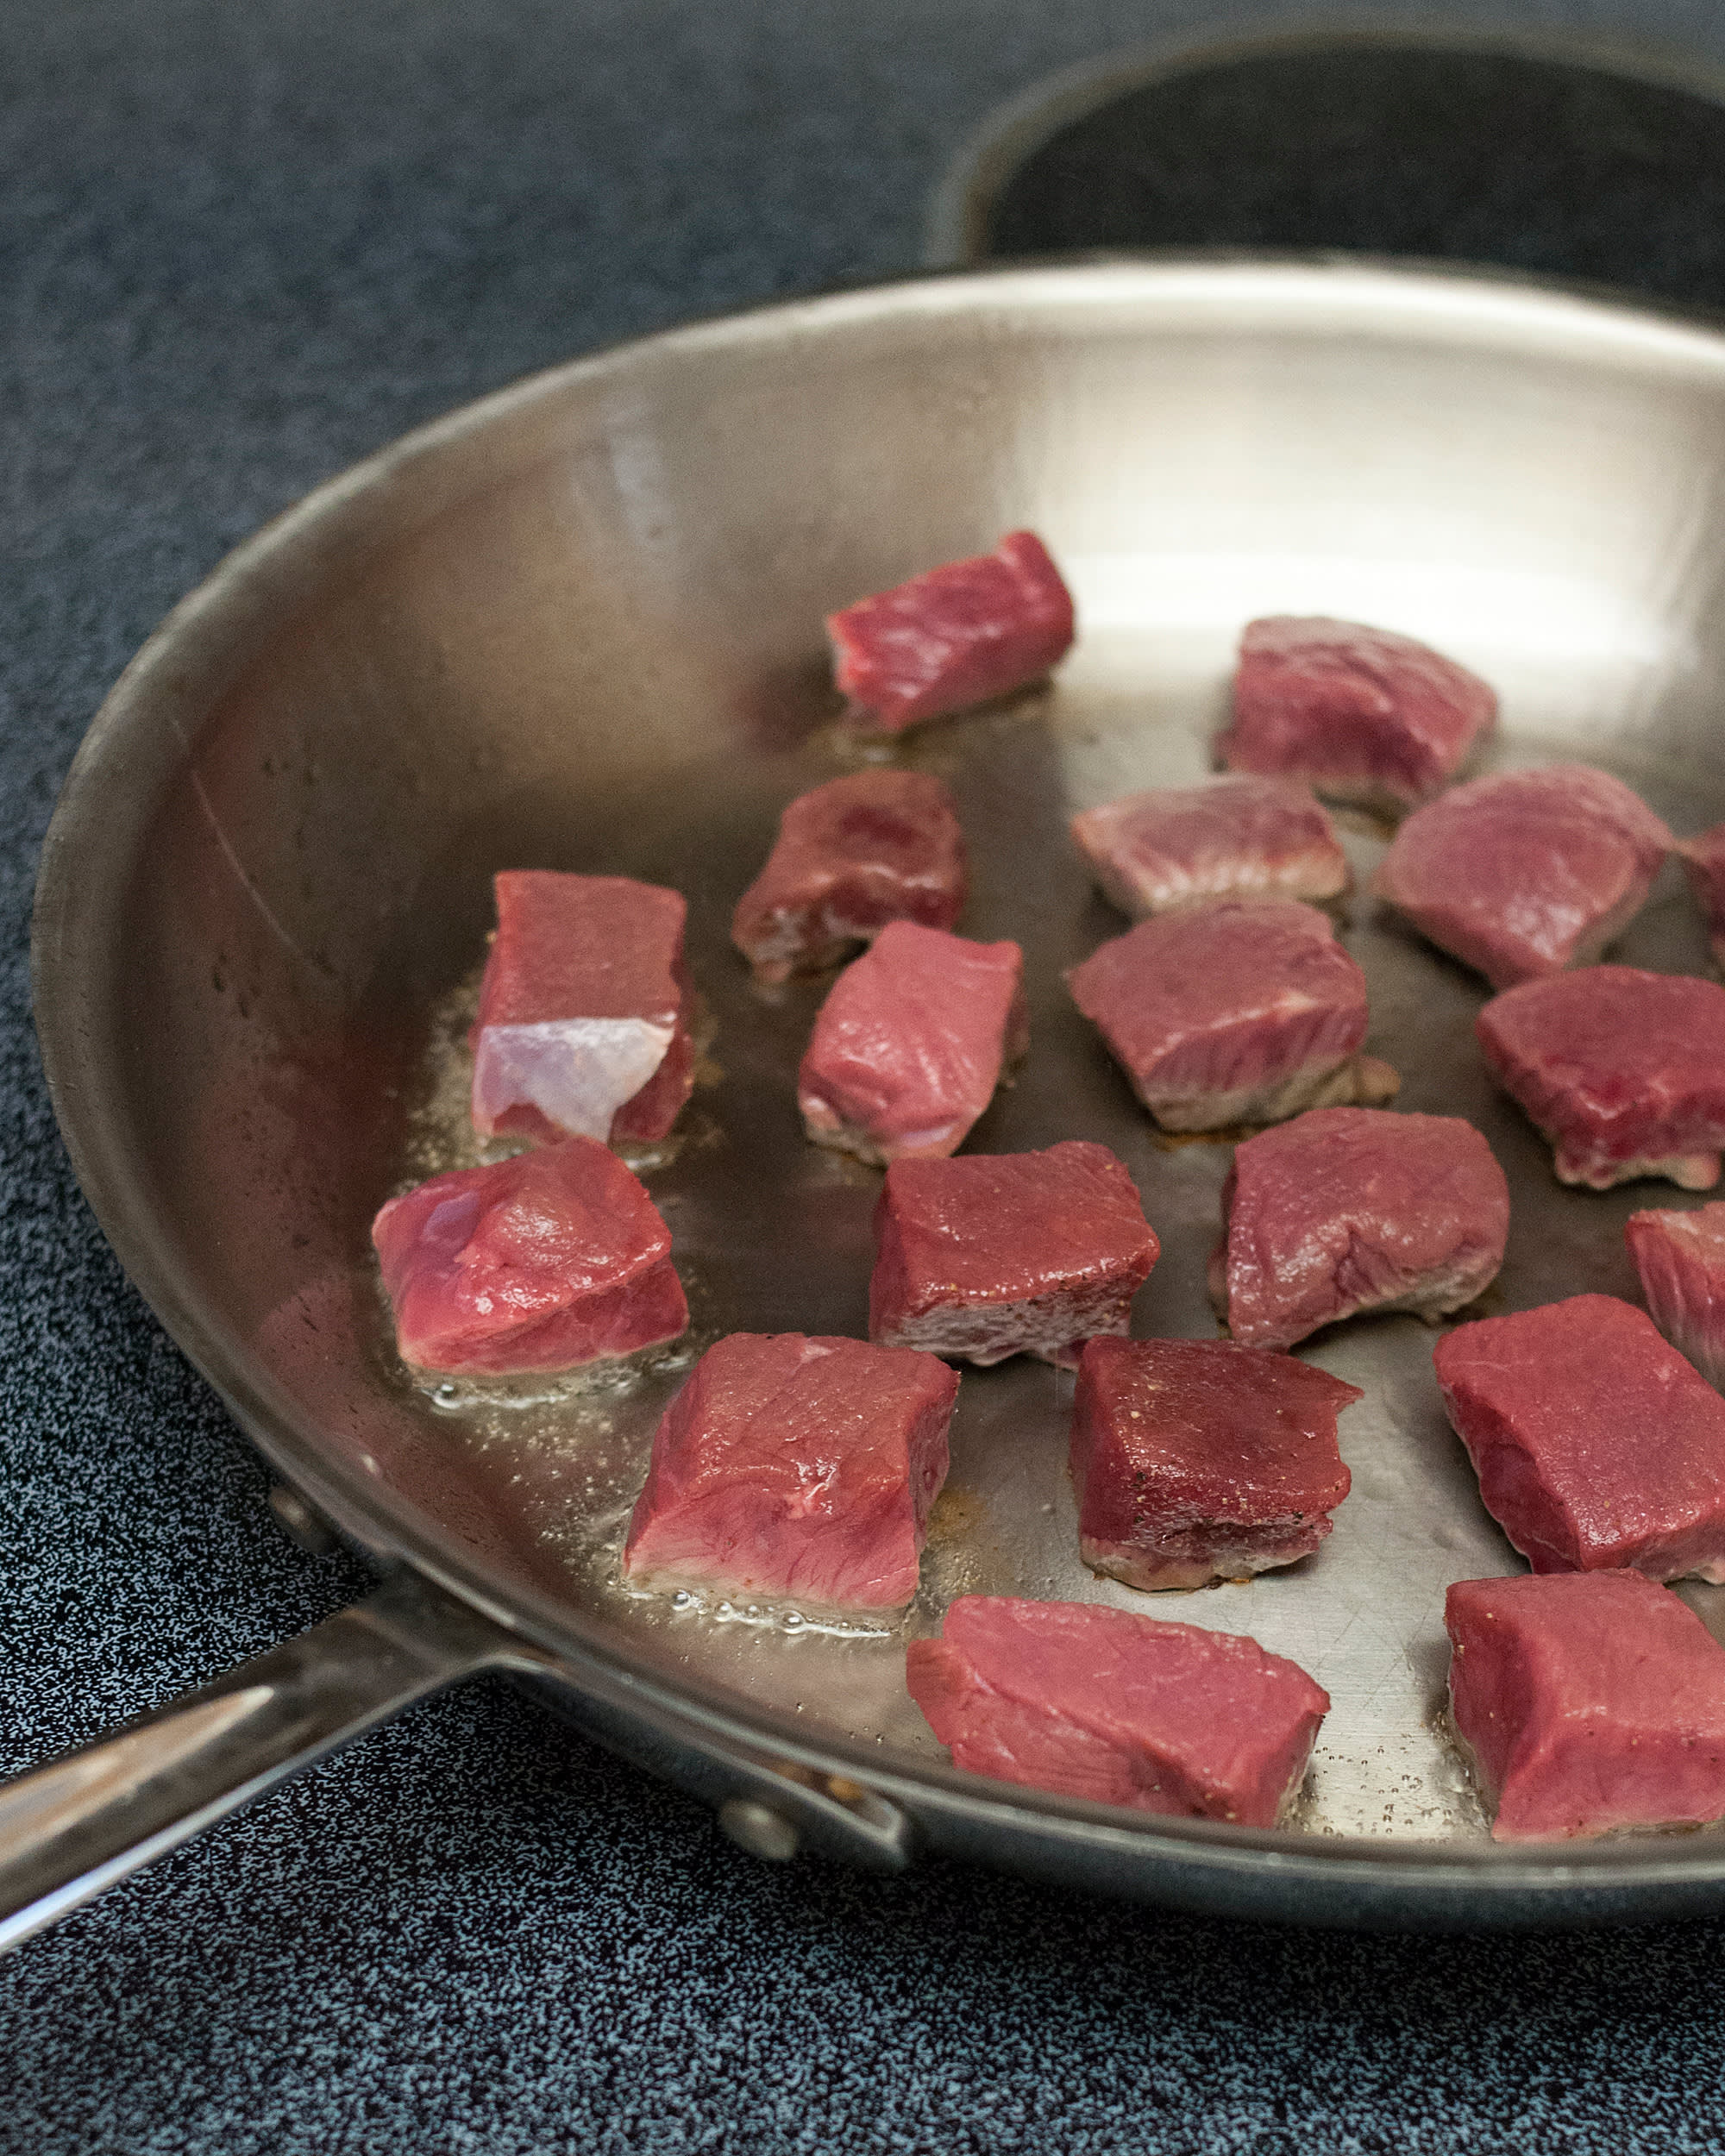 How To Sear Meat Properly